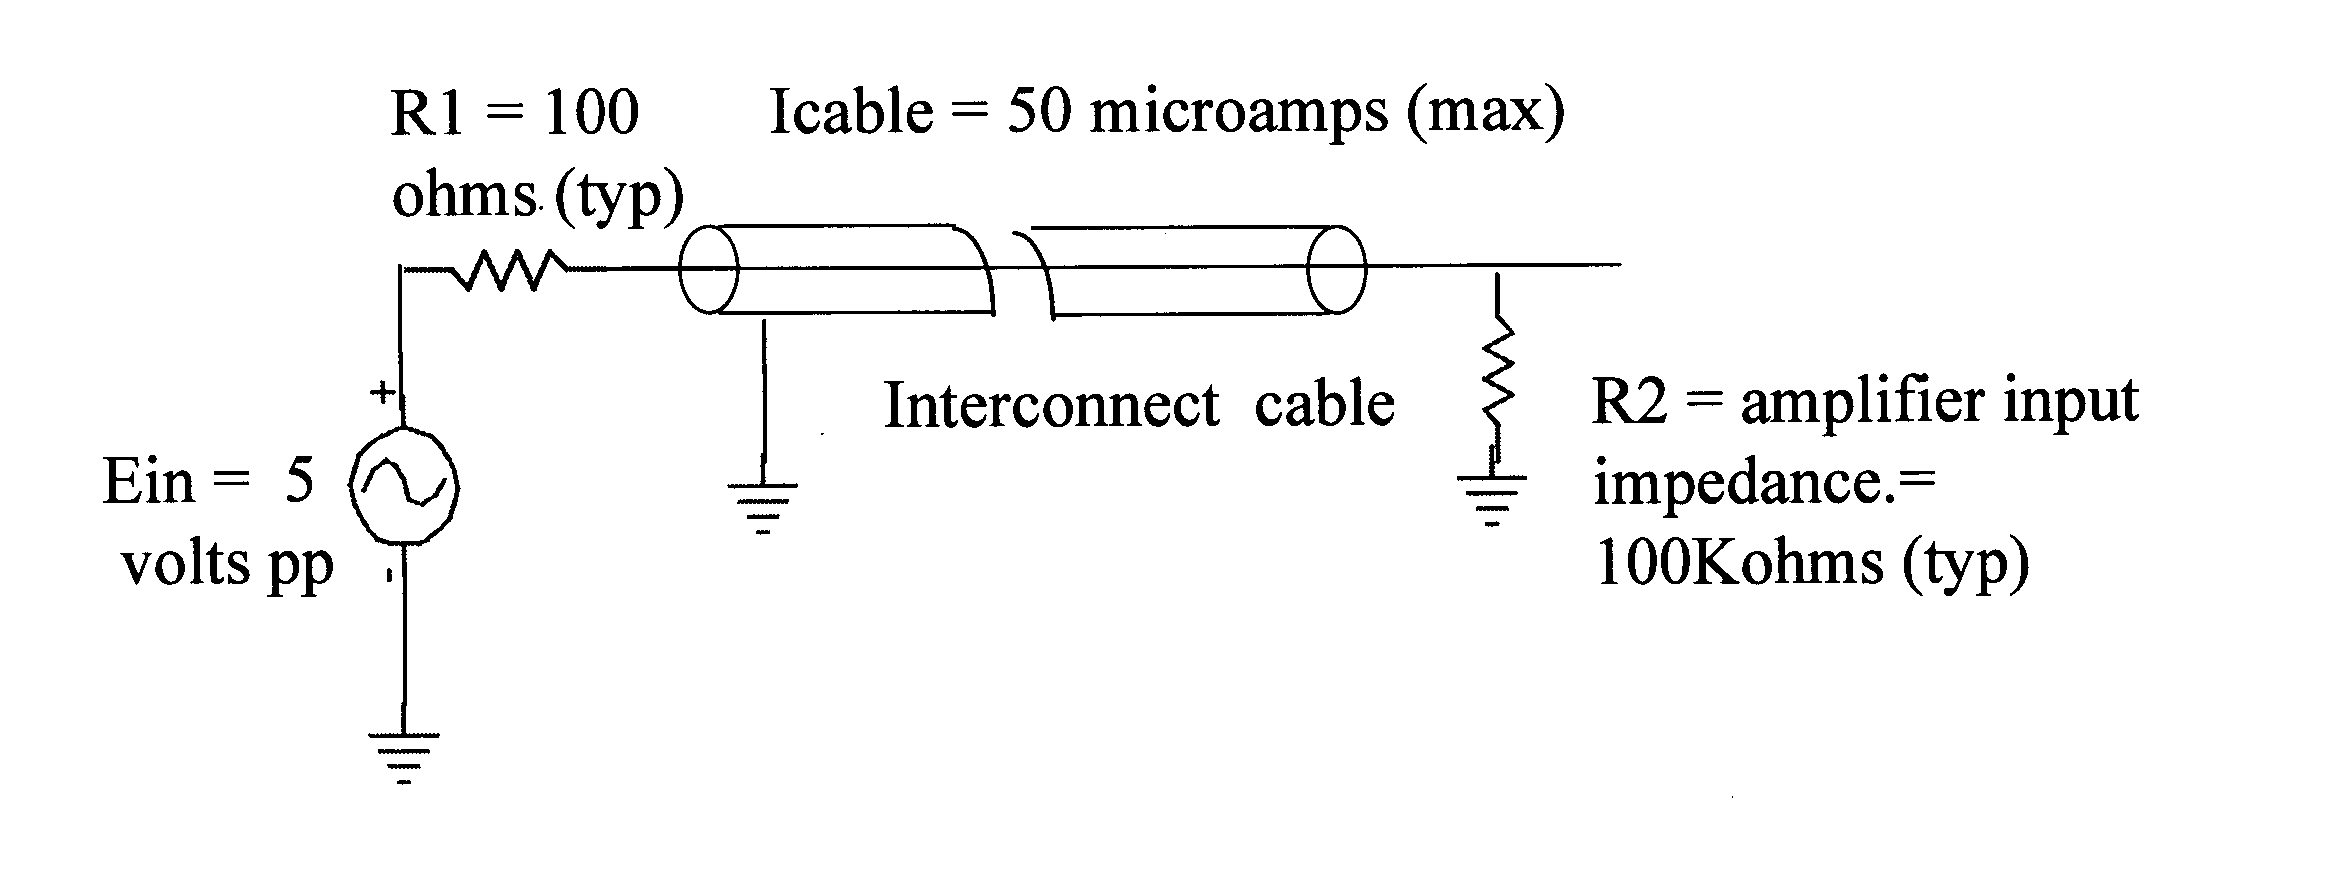 Transmission drive line for low level audio analog electrical signals